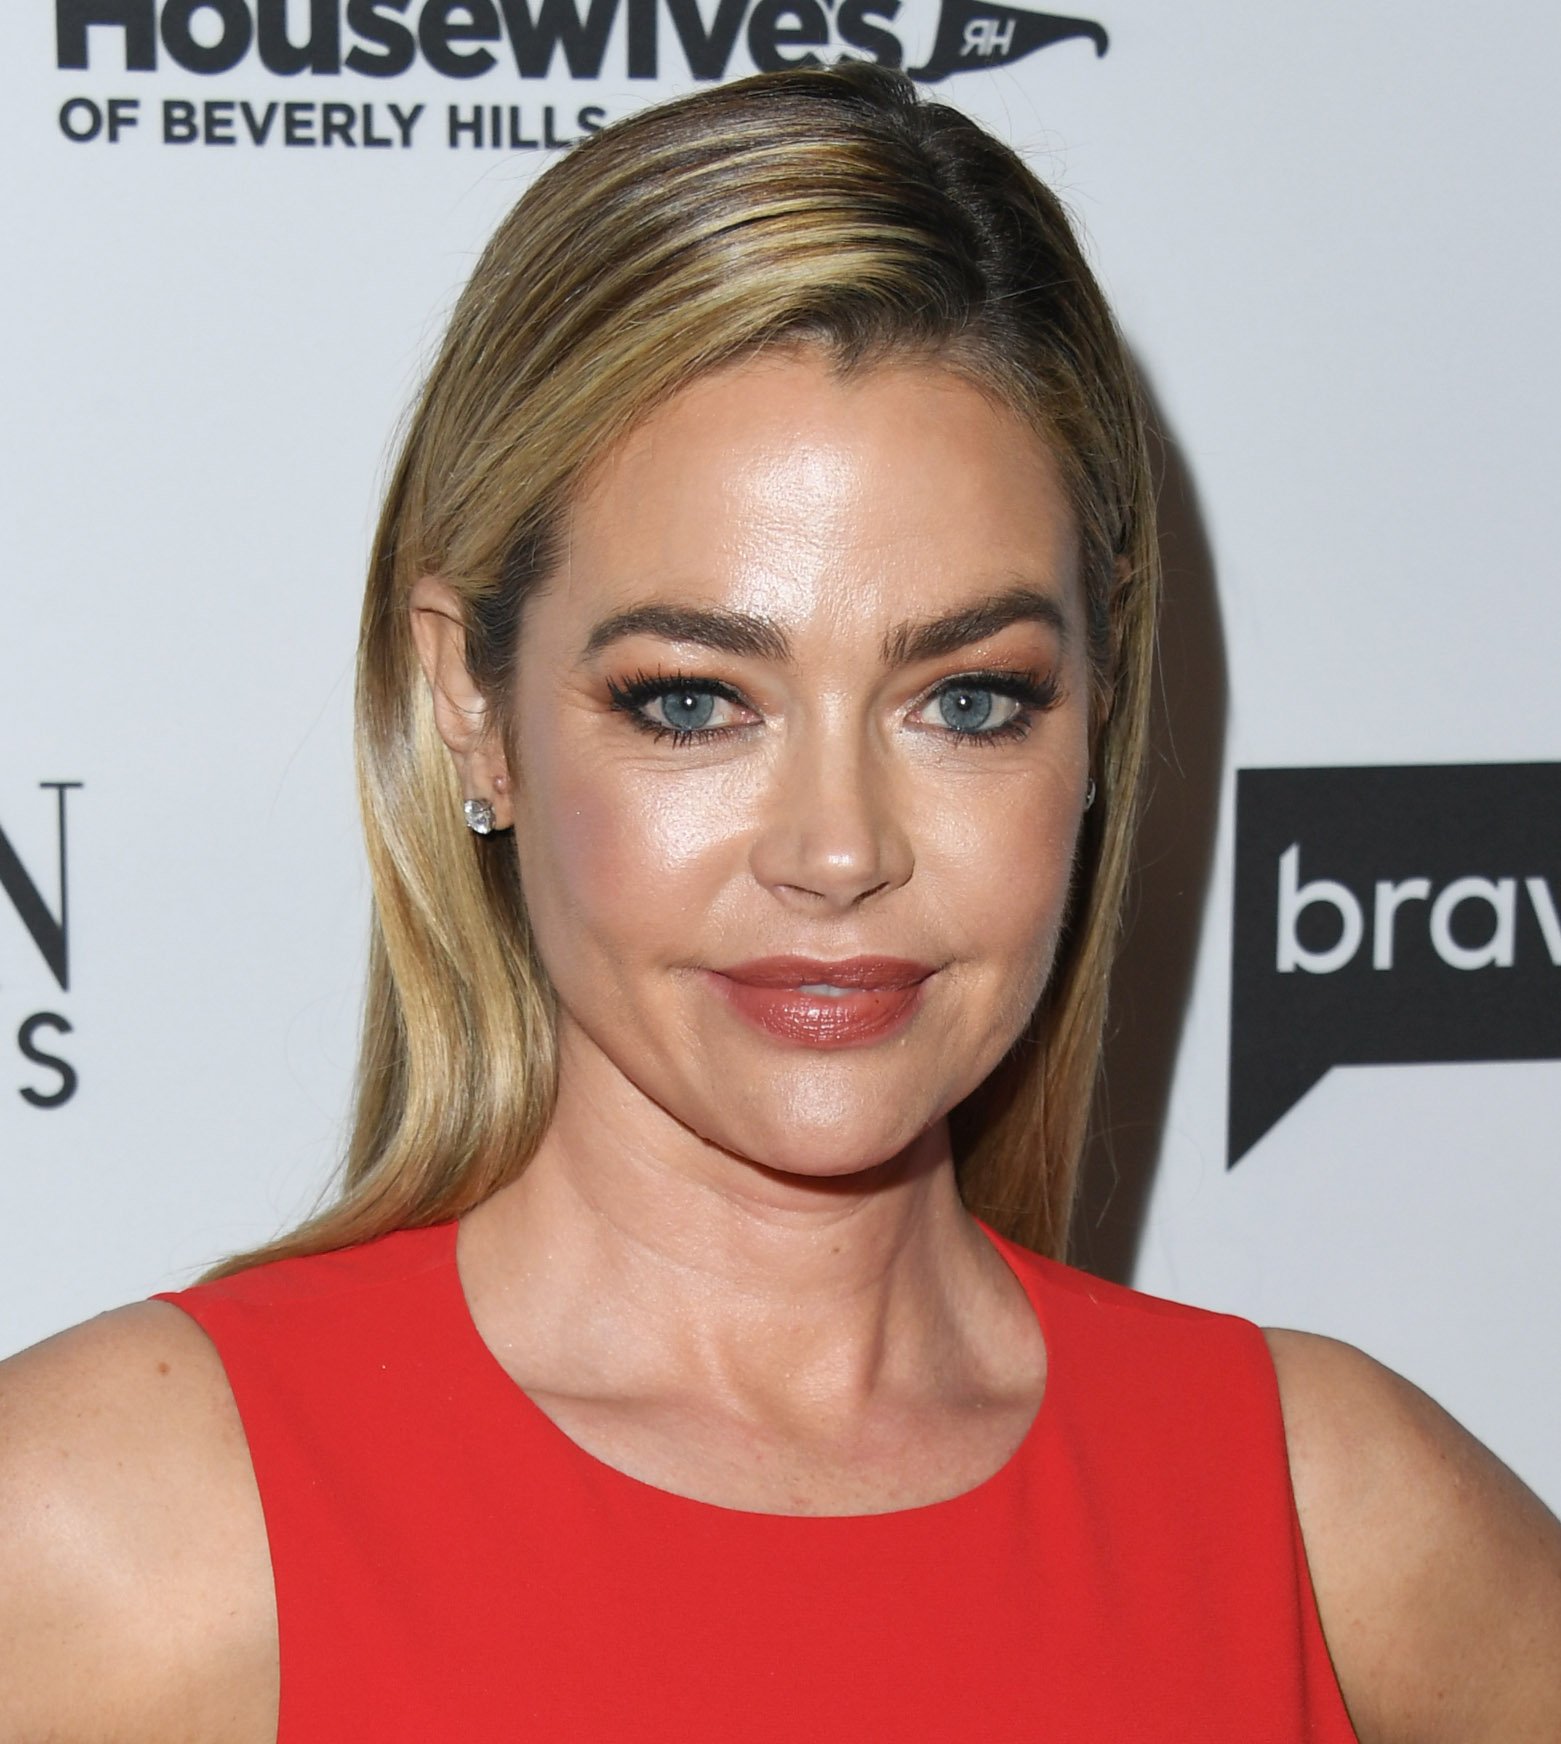 Denise Richards attends Bravo's Premiere Party For "The Real Housewives Of Beverly Hills" Season 9 And "Mexican Dynasties"at Gracias Madre on February 12, 2019. | Photo: GettyImages